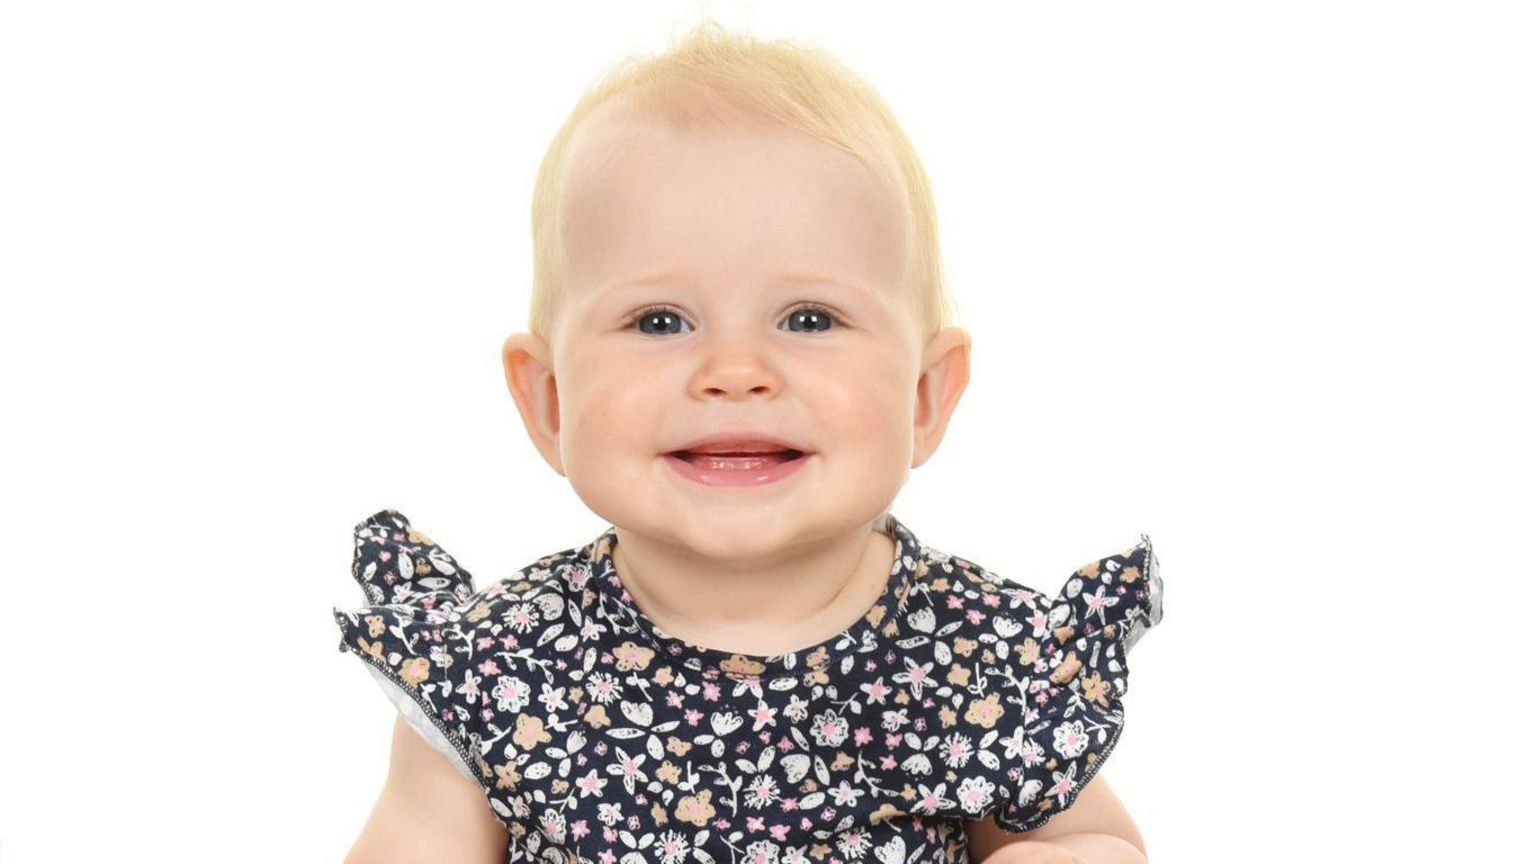 A blond baby smiling at the camera 